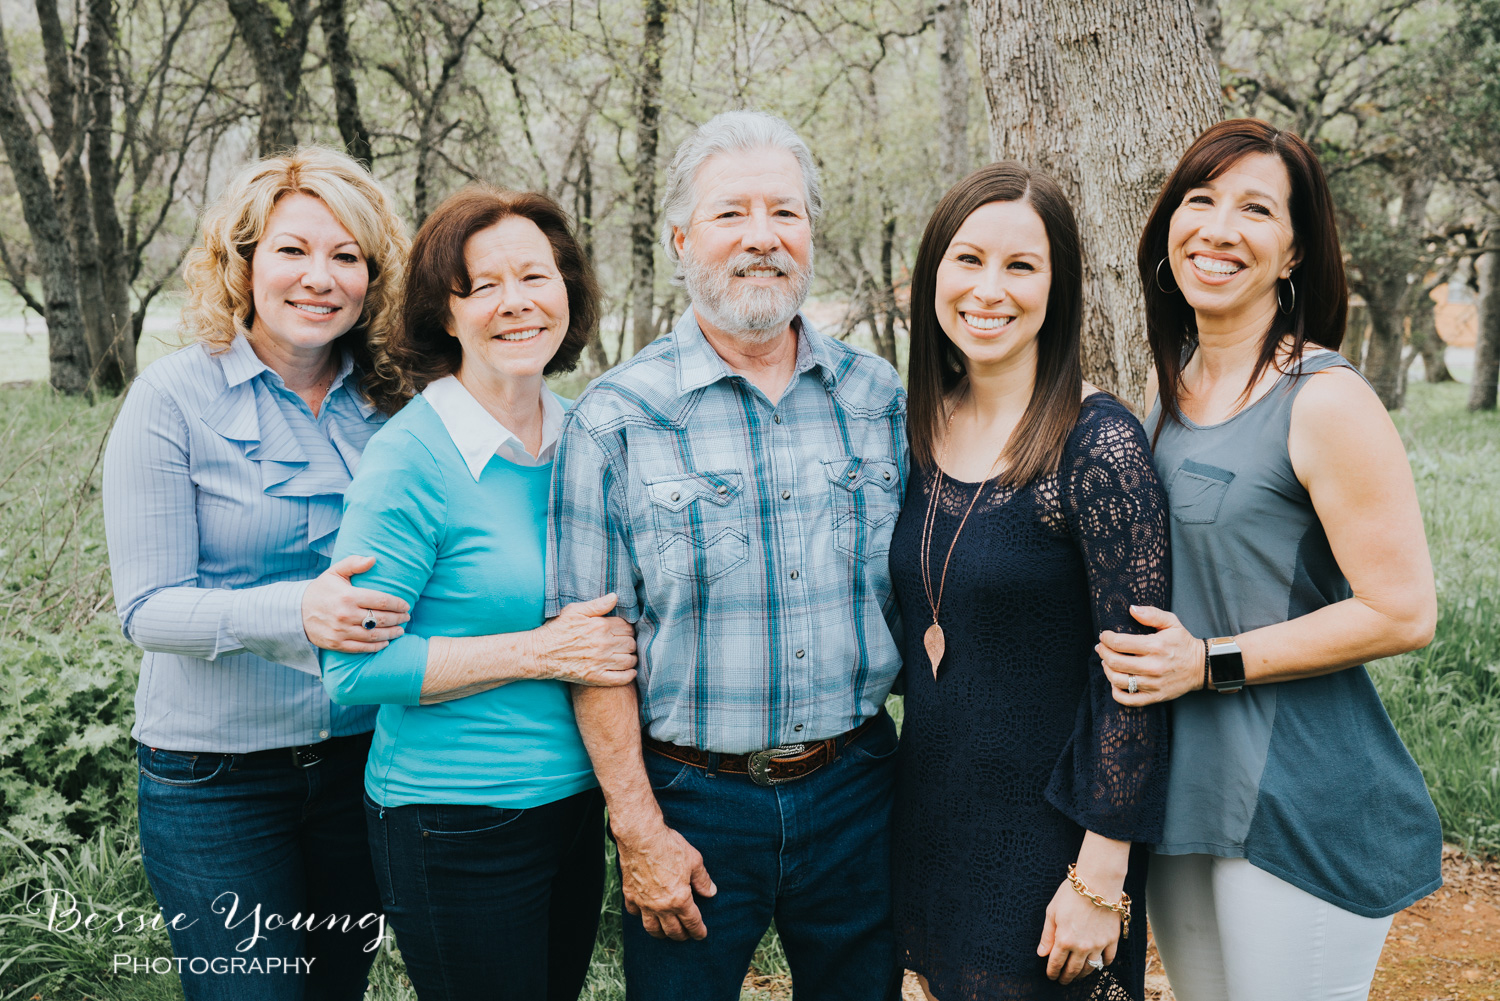 How To Take Large Family Portraits  Copperopolis Family Portraits by Bessie Young Photography 16.jpg